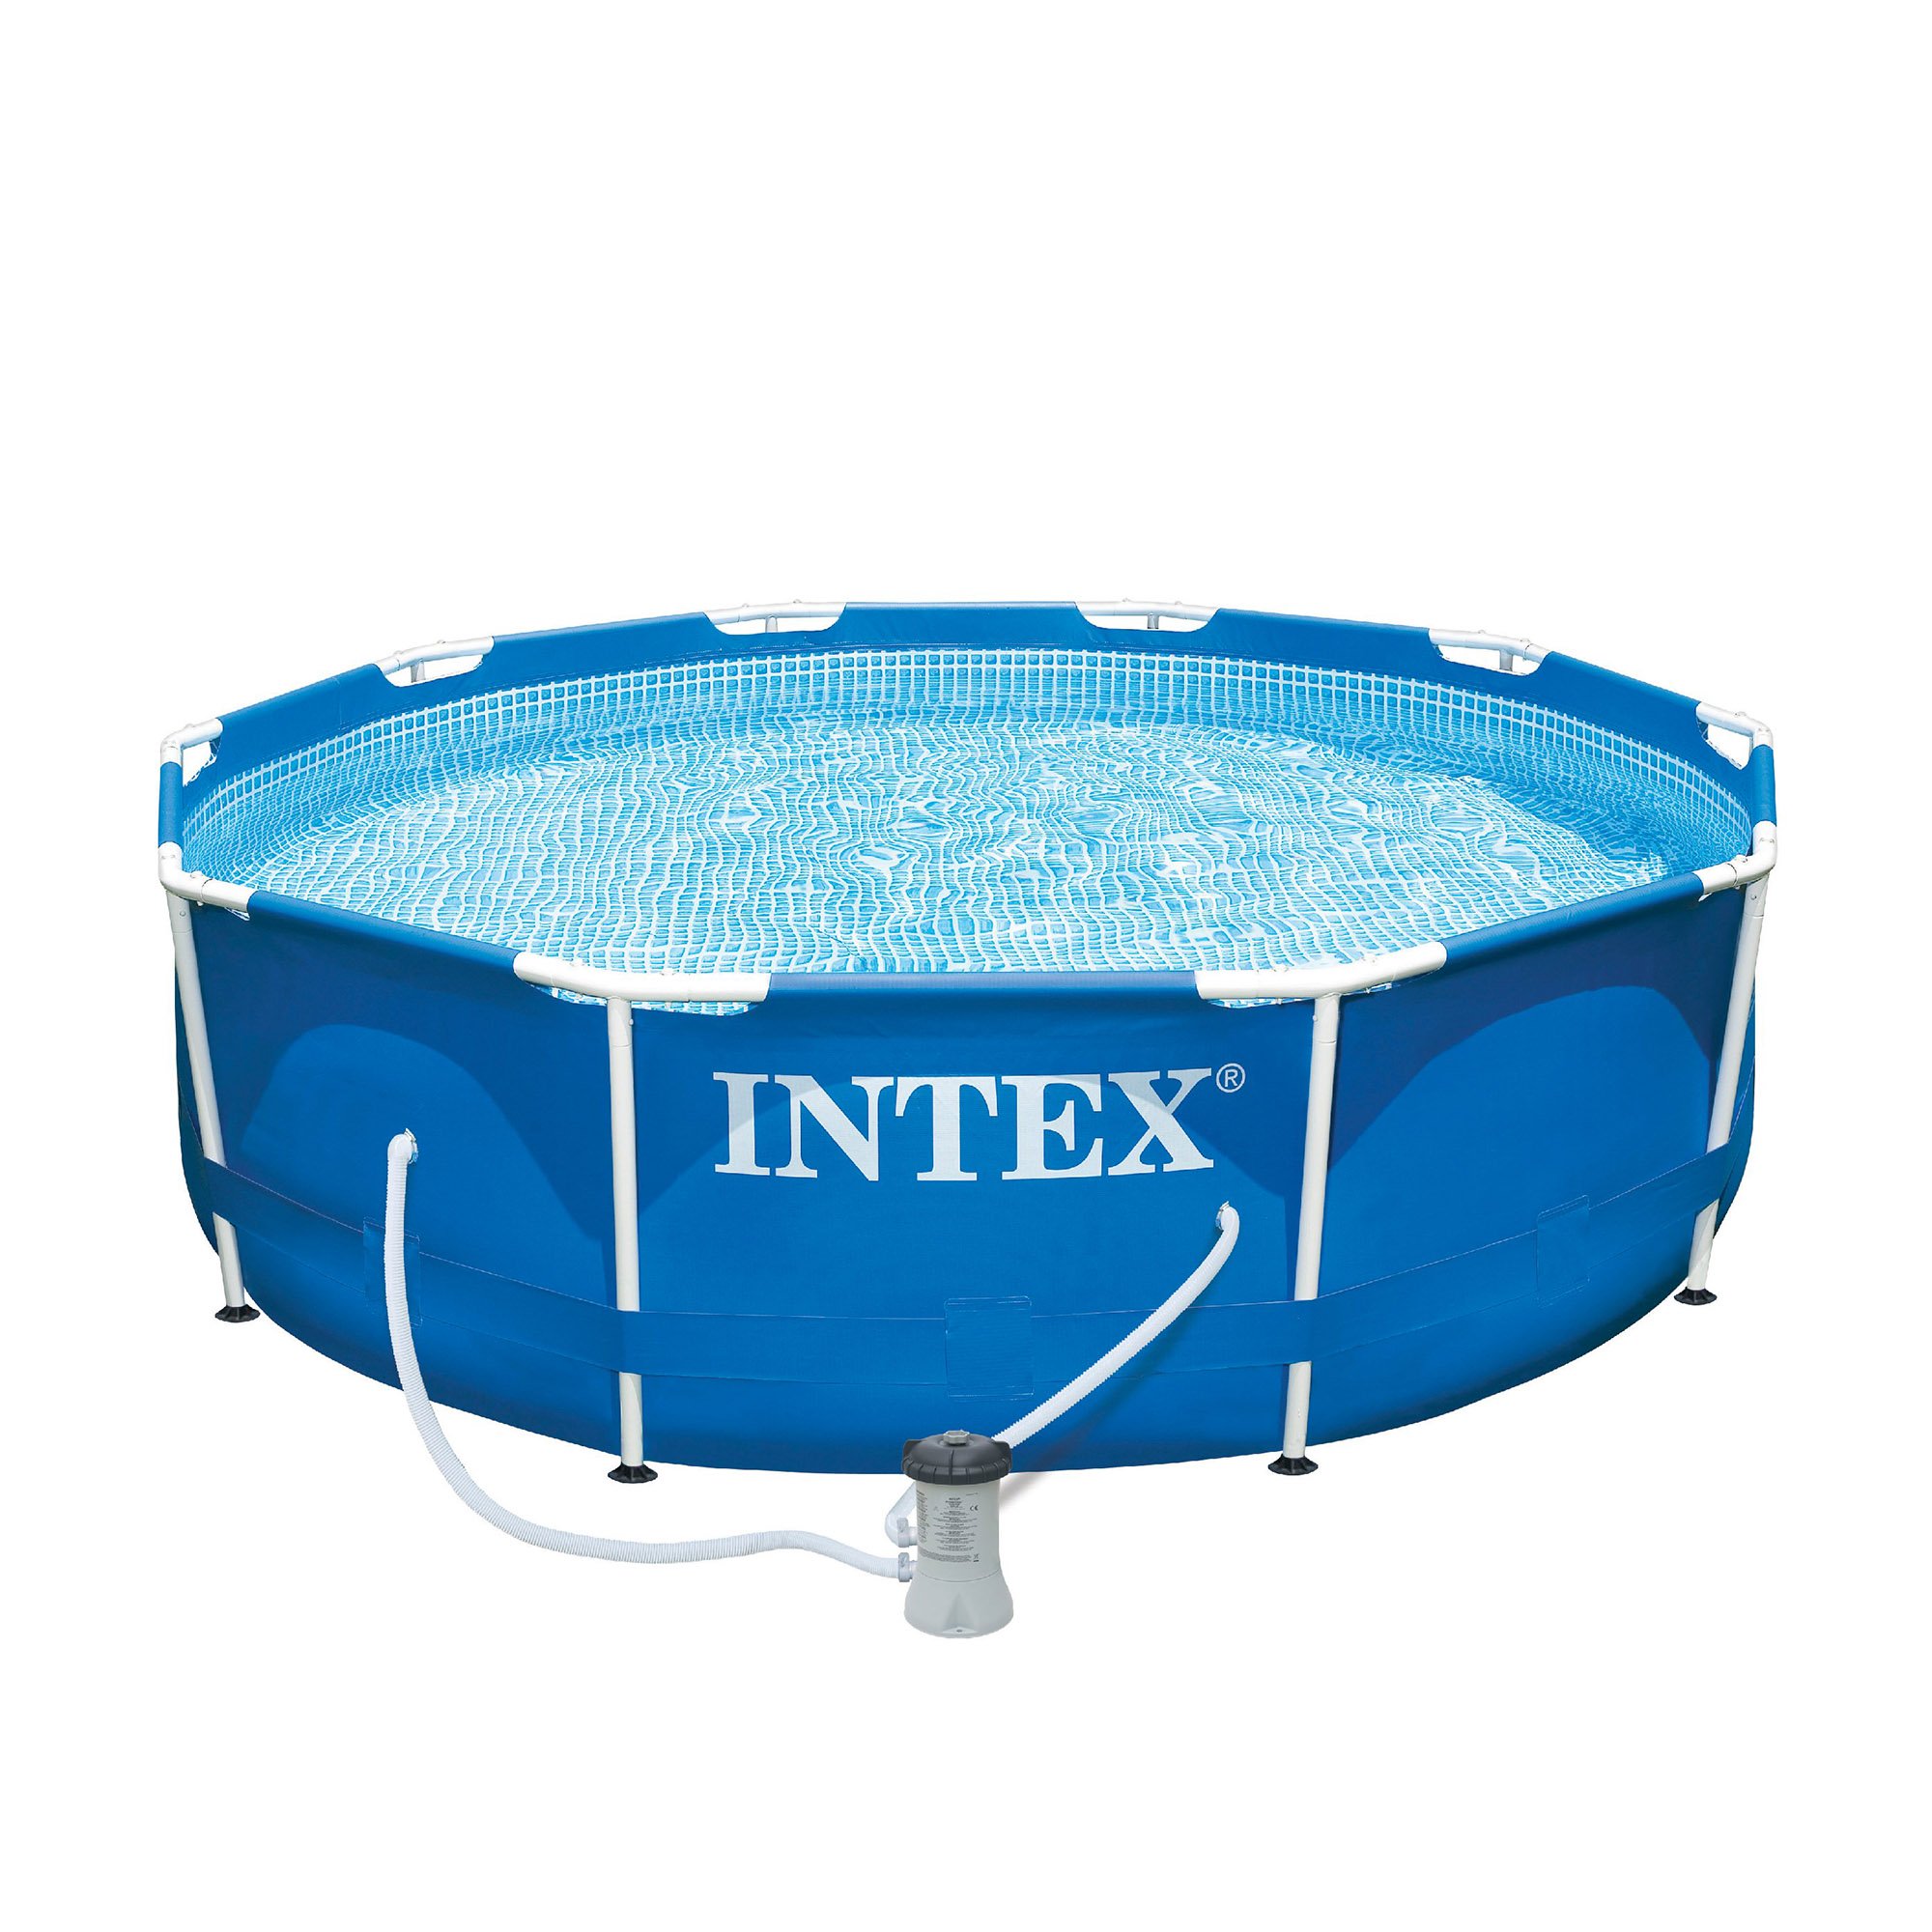 Intex 10-ft x 10-ft x 30-in Round Above-Ground Pool in the Above-Ground Pools department Lowes.com